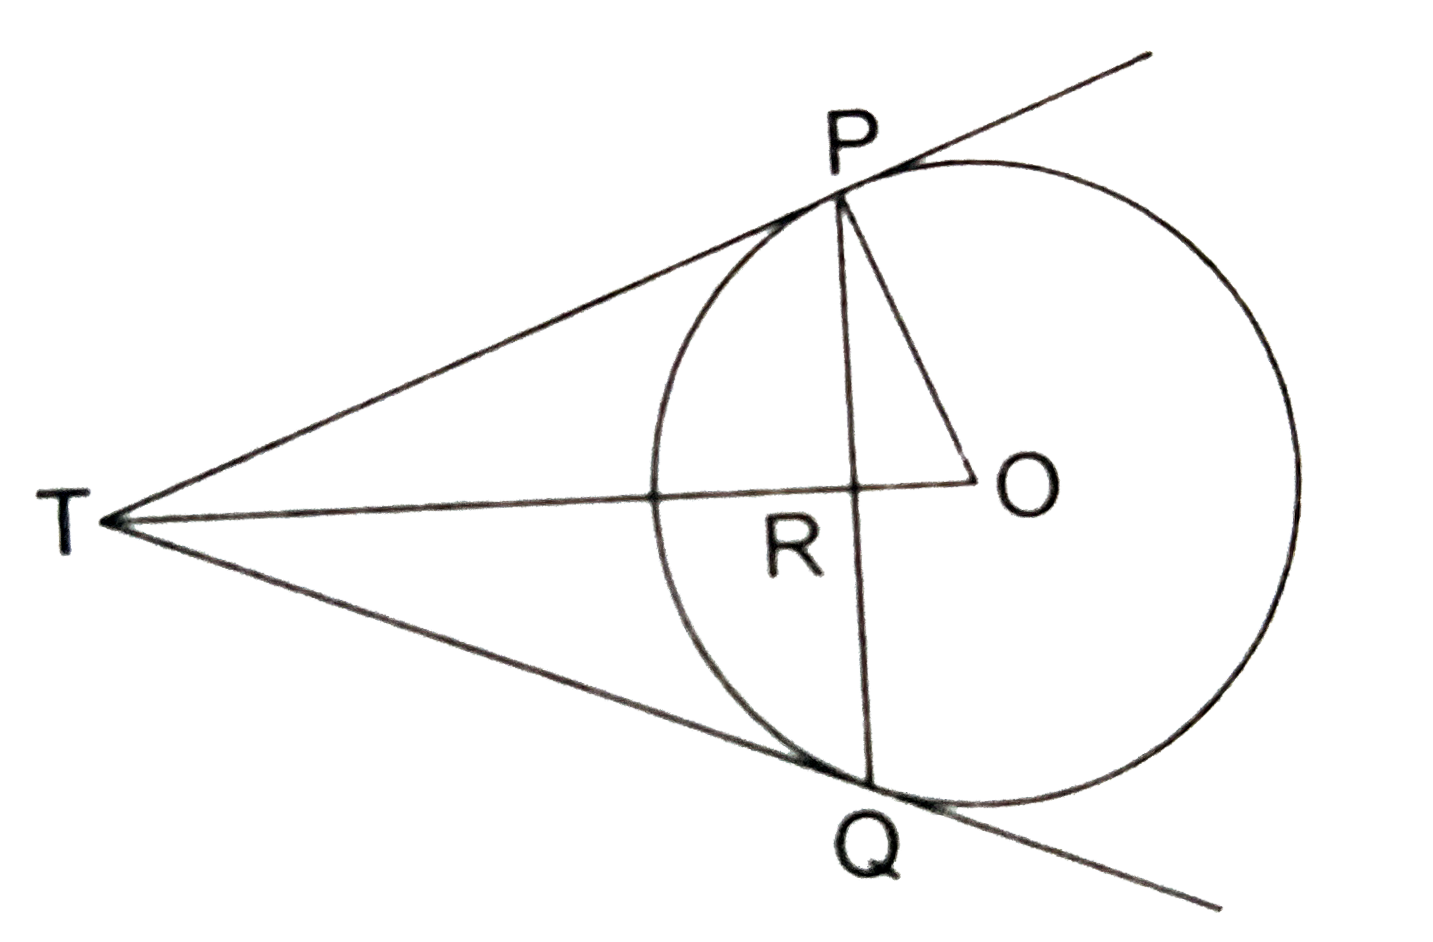 PQ is a chord of length 4.8cm of a circle of radius 3cm. The tangents at P and Q intersect at a point T as shown in the figure. Find the length of TP.